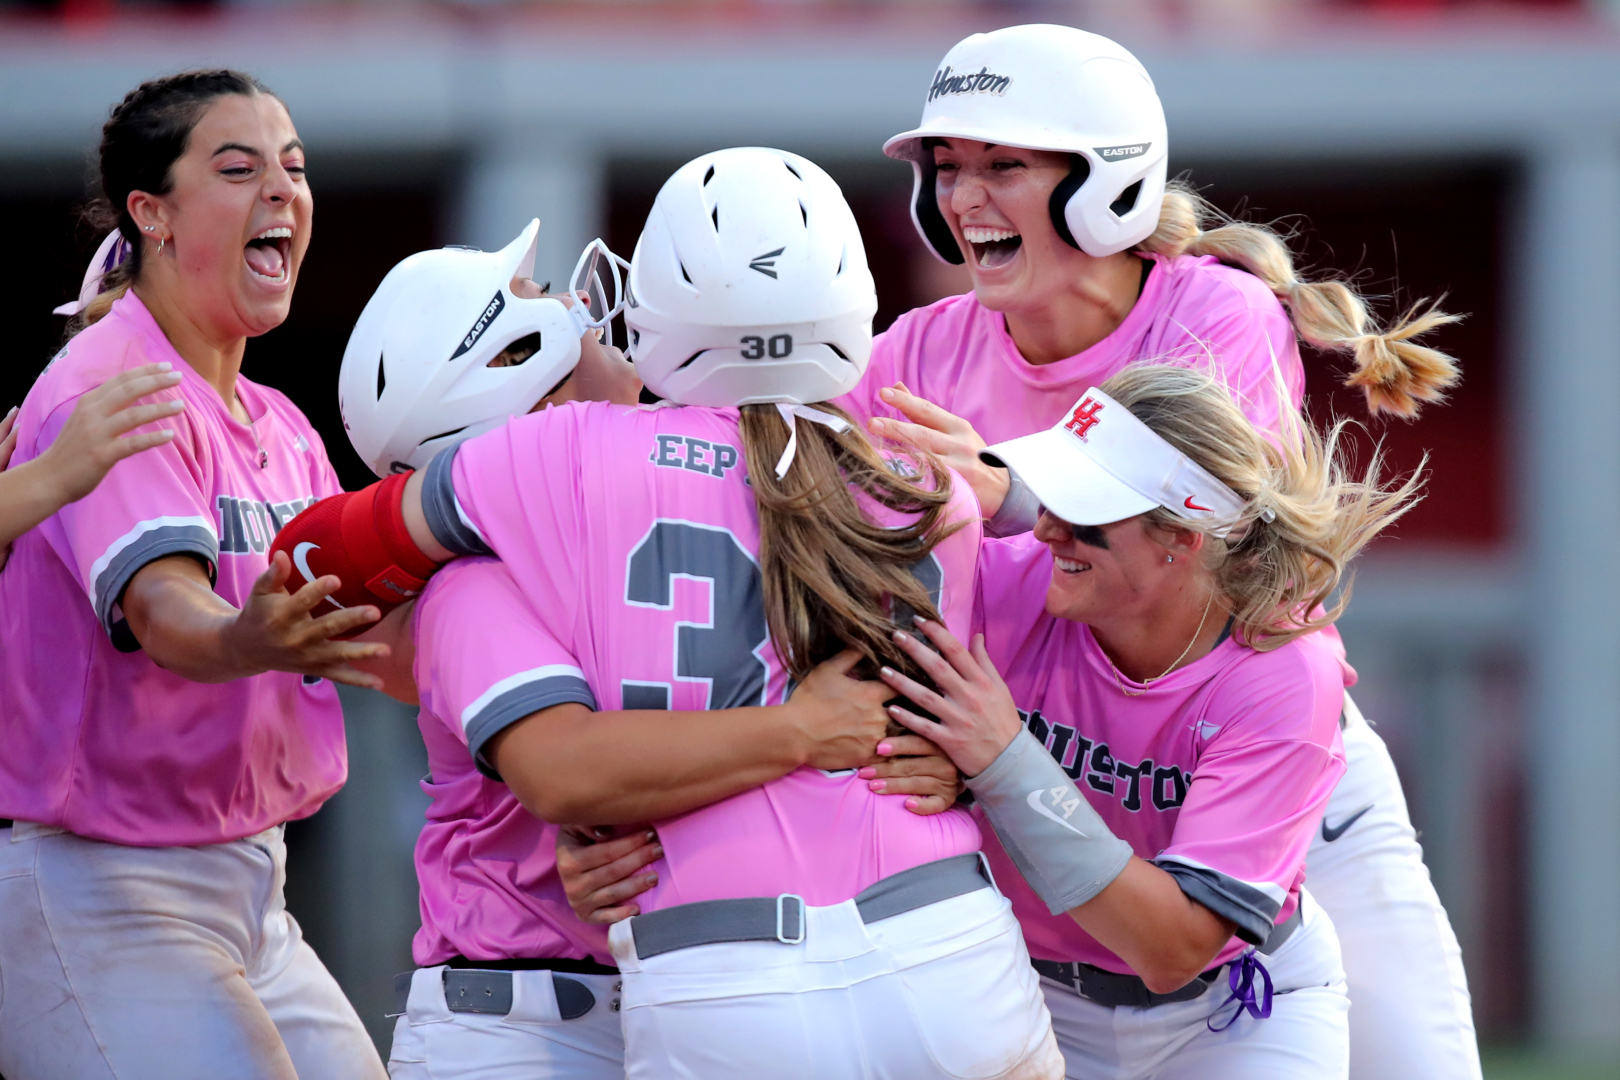 Emma Robertson is mobbed by her teammates after delivering a walk-off double to give UH softball the doubleheader sweep over Texas A&M on Wednesday afternoon. | Courtesy of UH athletics